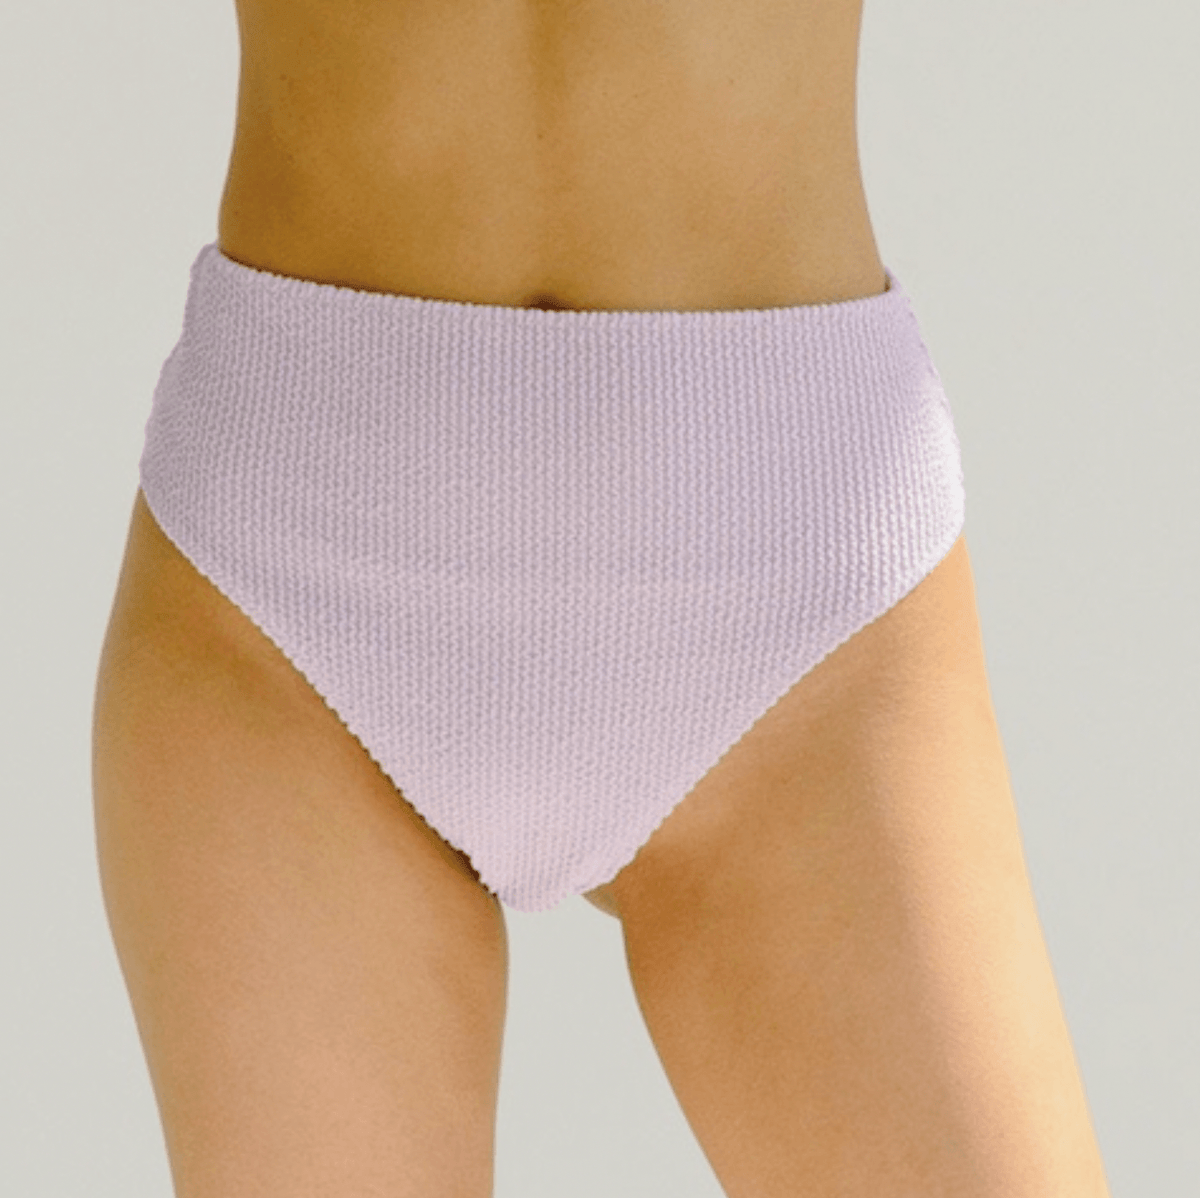 8 Reasons For Blood In Your Panties (Other Than Your Period)